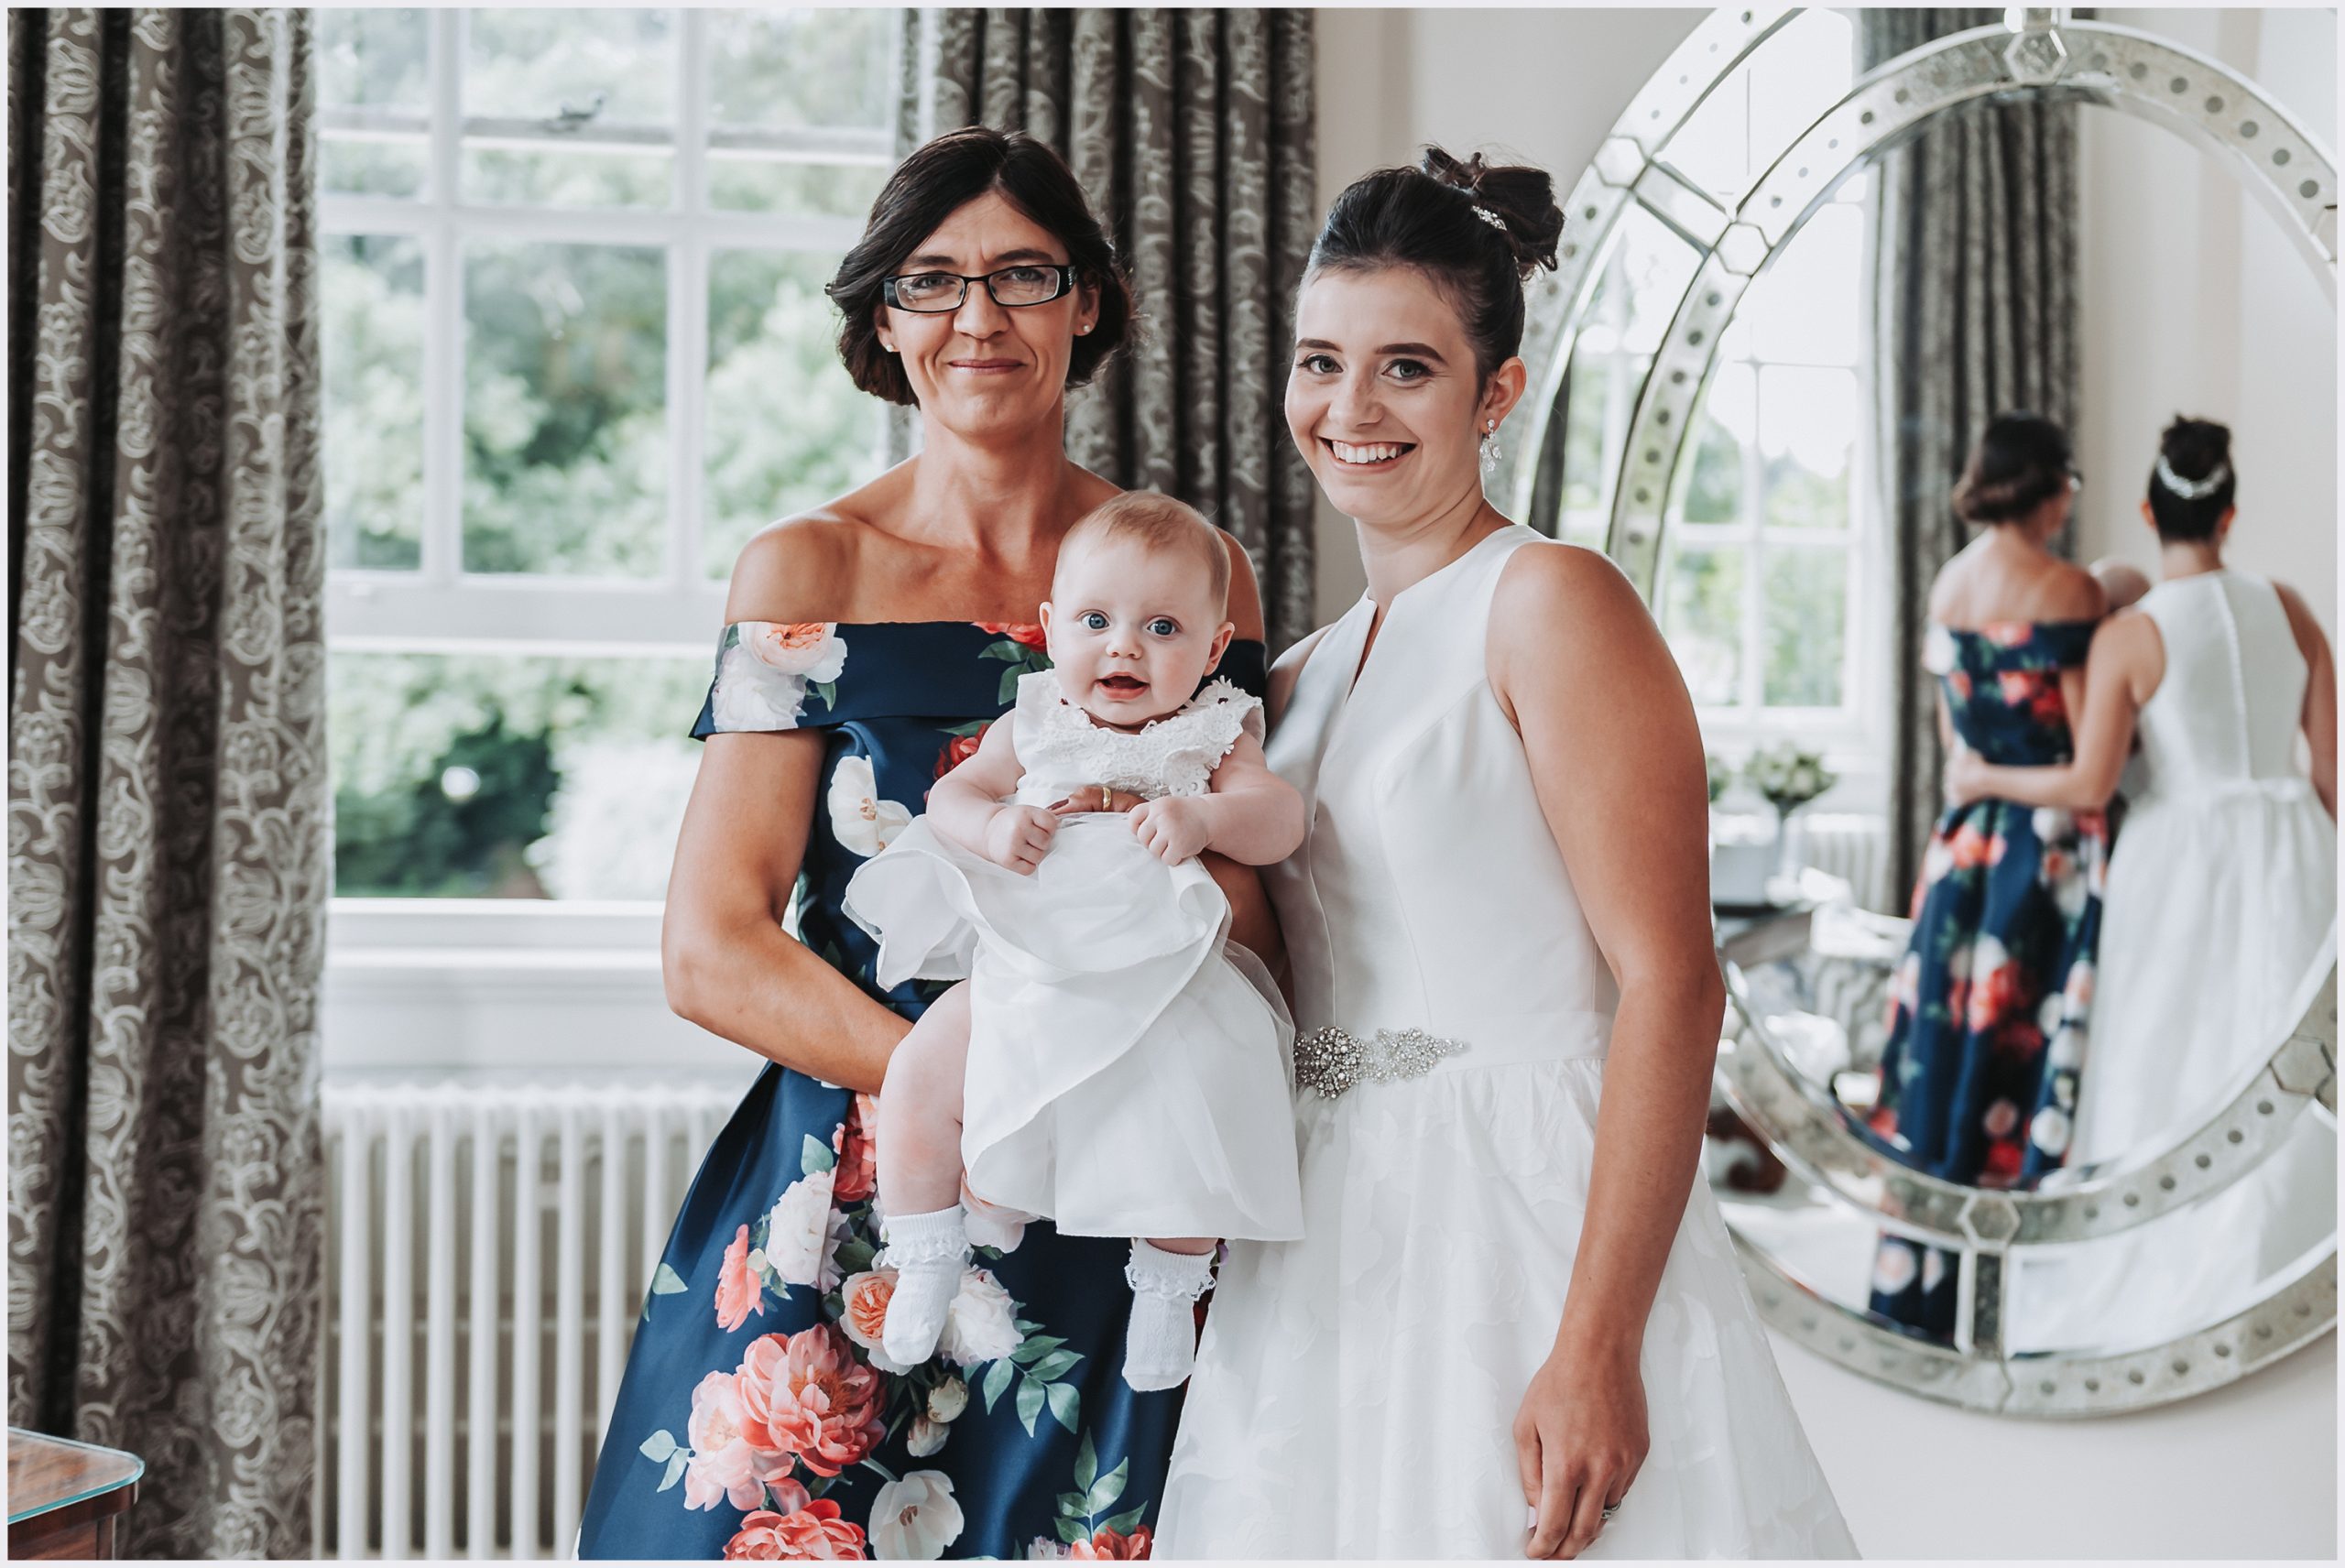 A bride, her daughter and her mother pose for a photograph in the beautiful bridal suite at Iscoyd Park on the morning of her wedding.  Image captured by Welsh wedding Photographer Helena Jayne Photography.